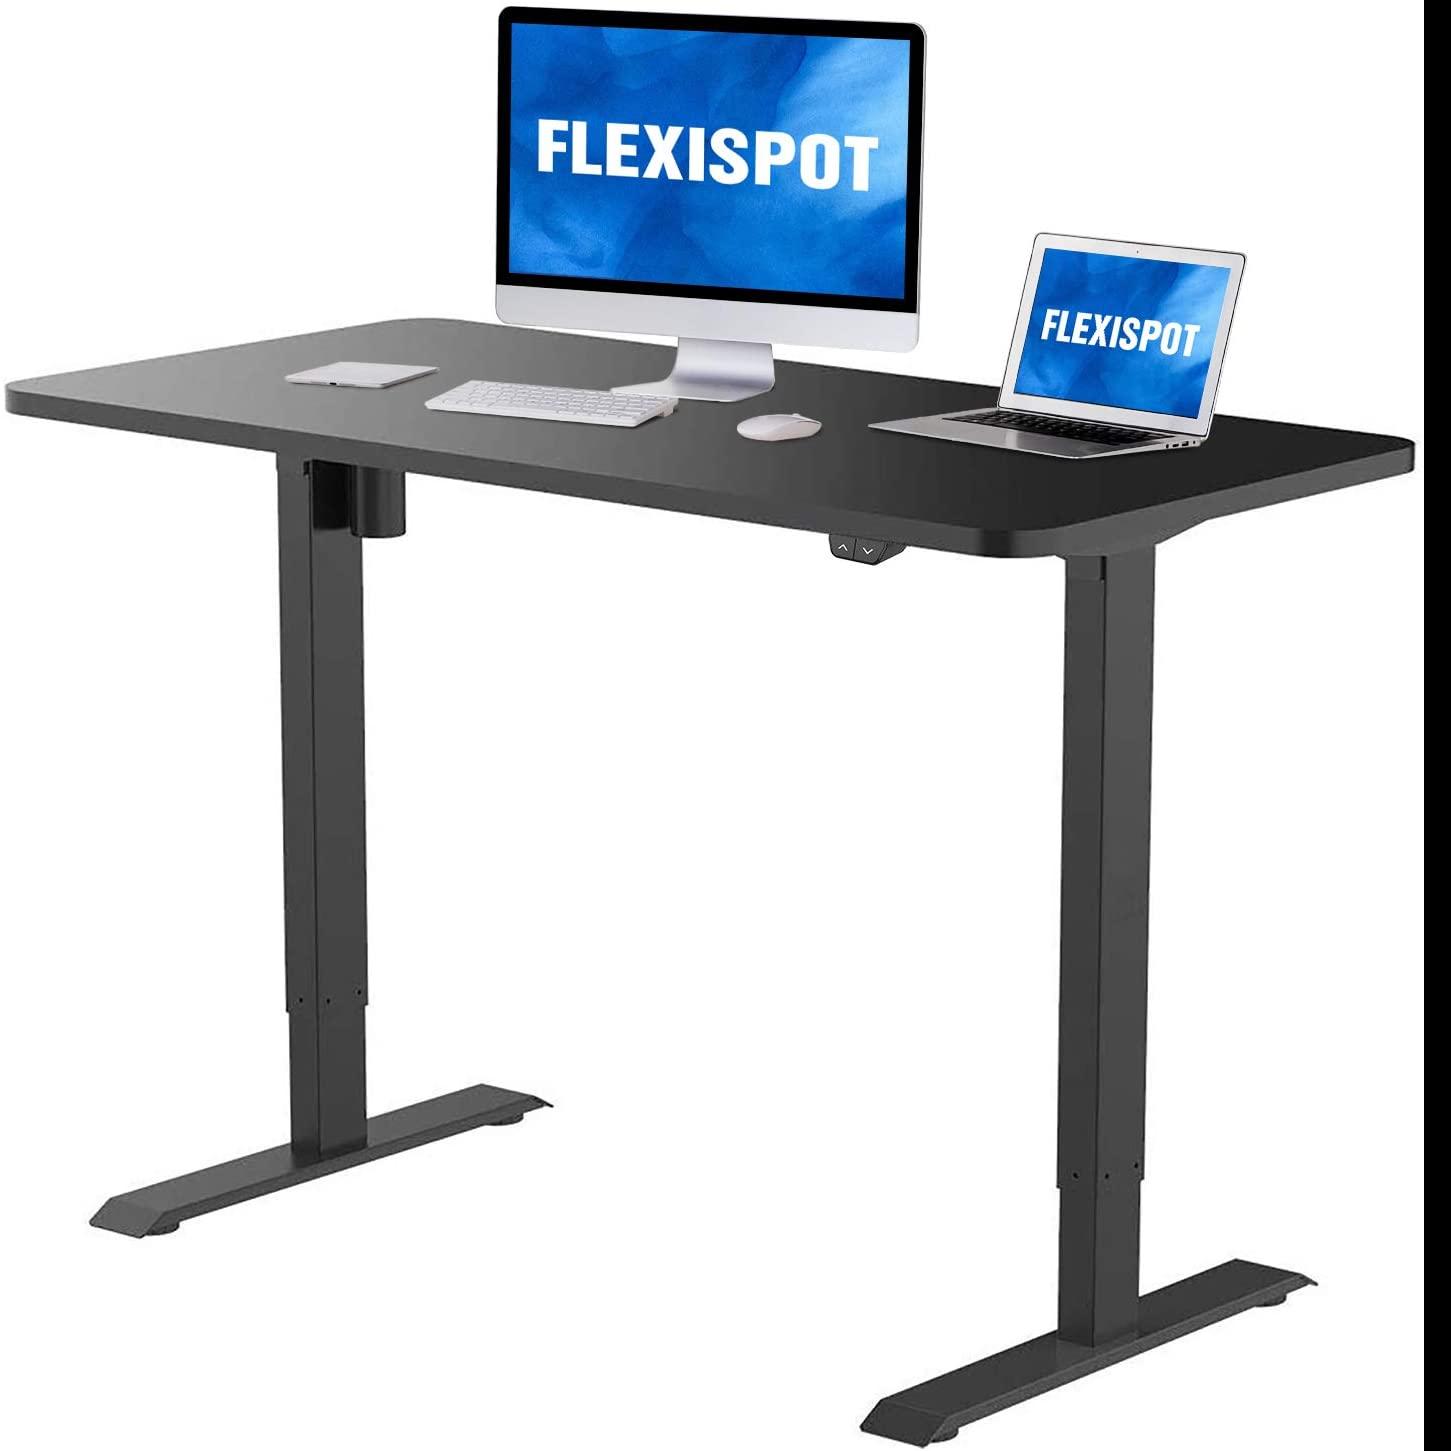 Flexispot 48x30 Adjustable Electric Stand Up Desk for $199 Shipped